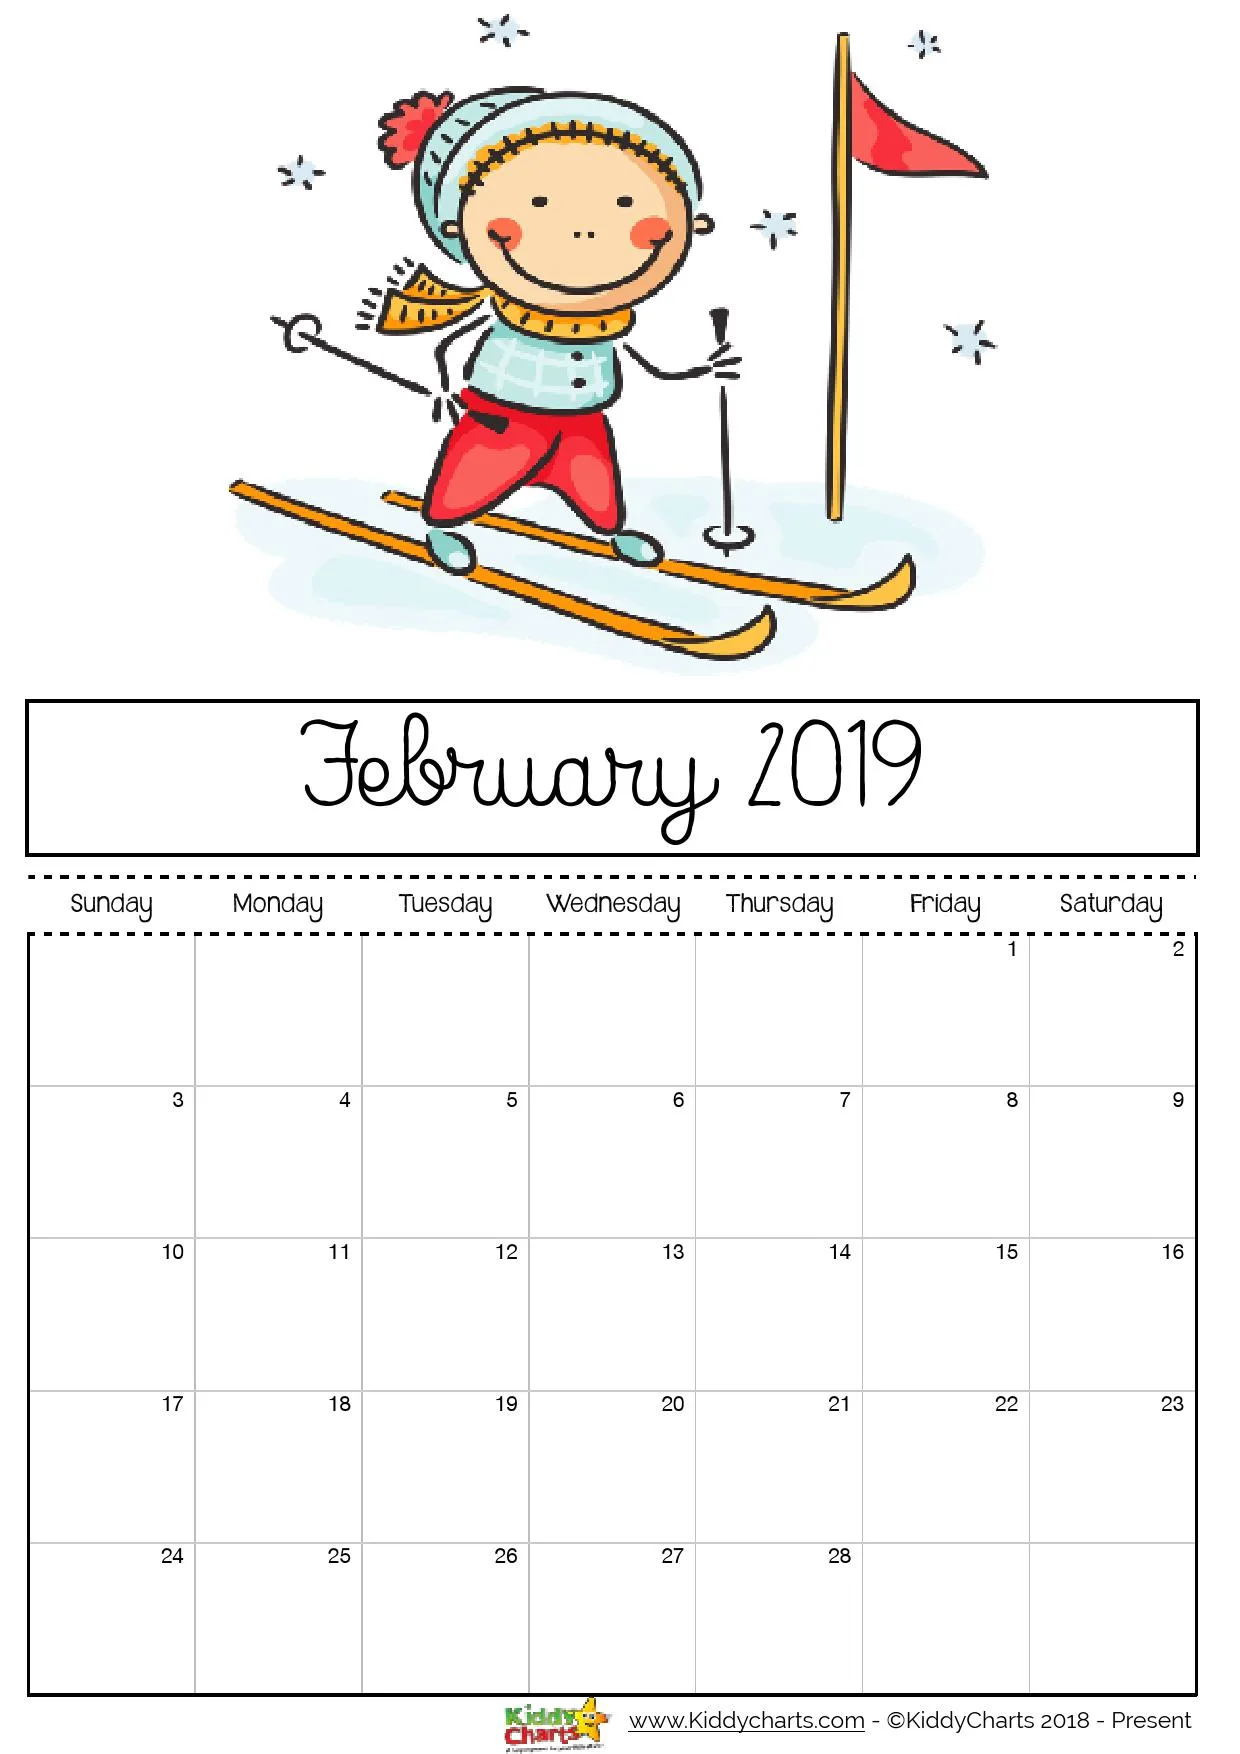 January printable 2019 calendar sheet - girl skiing. Which is definitely something we will want to be doing this year! #printables #2019calendar #kidsprintables